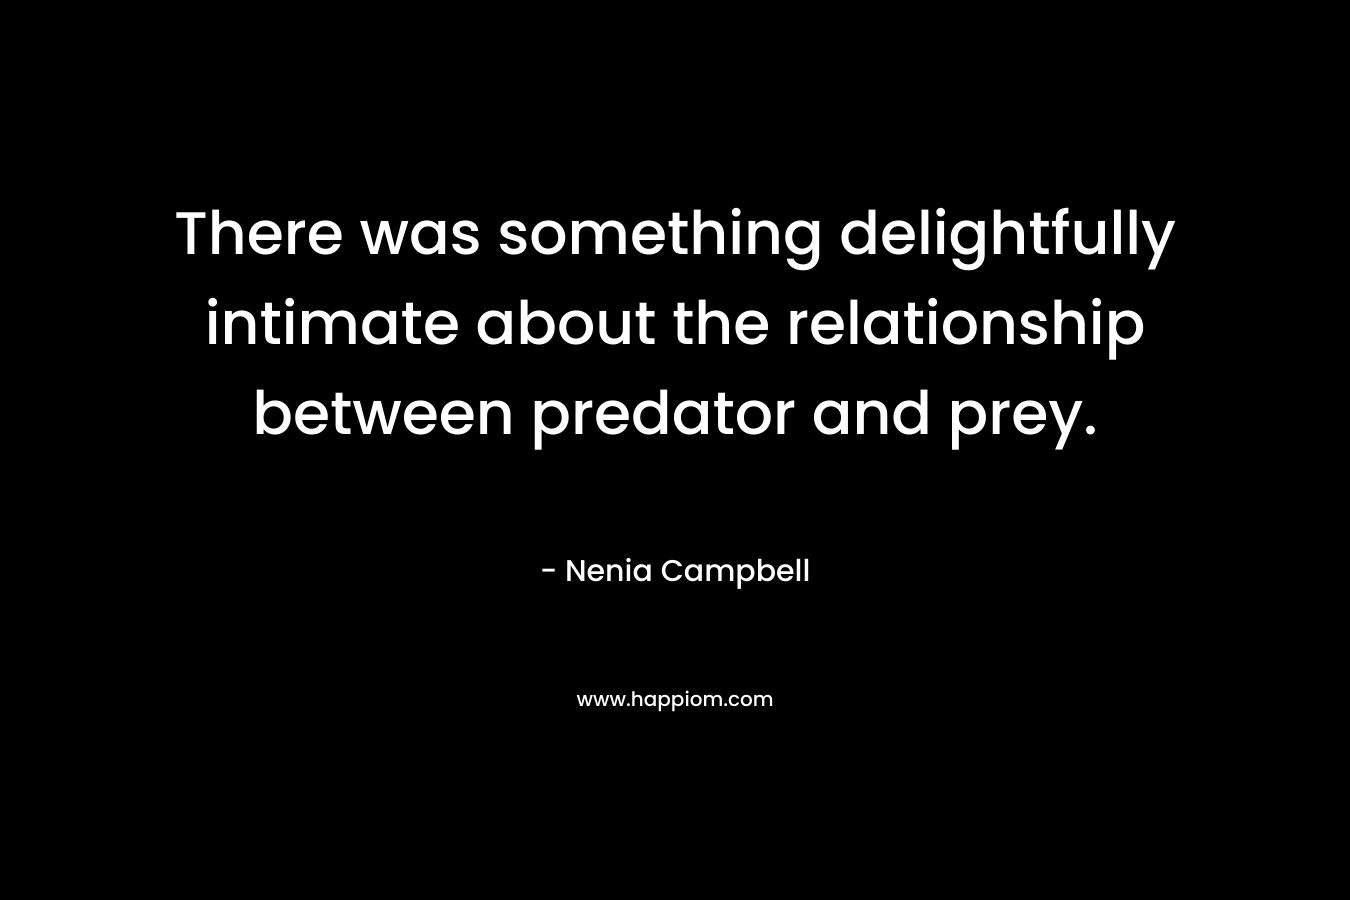 There was something delightfully intimate about the relationship between predator and prey.